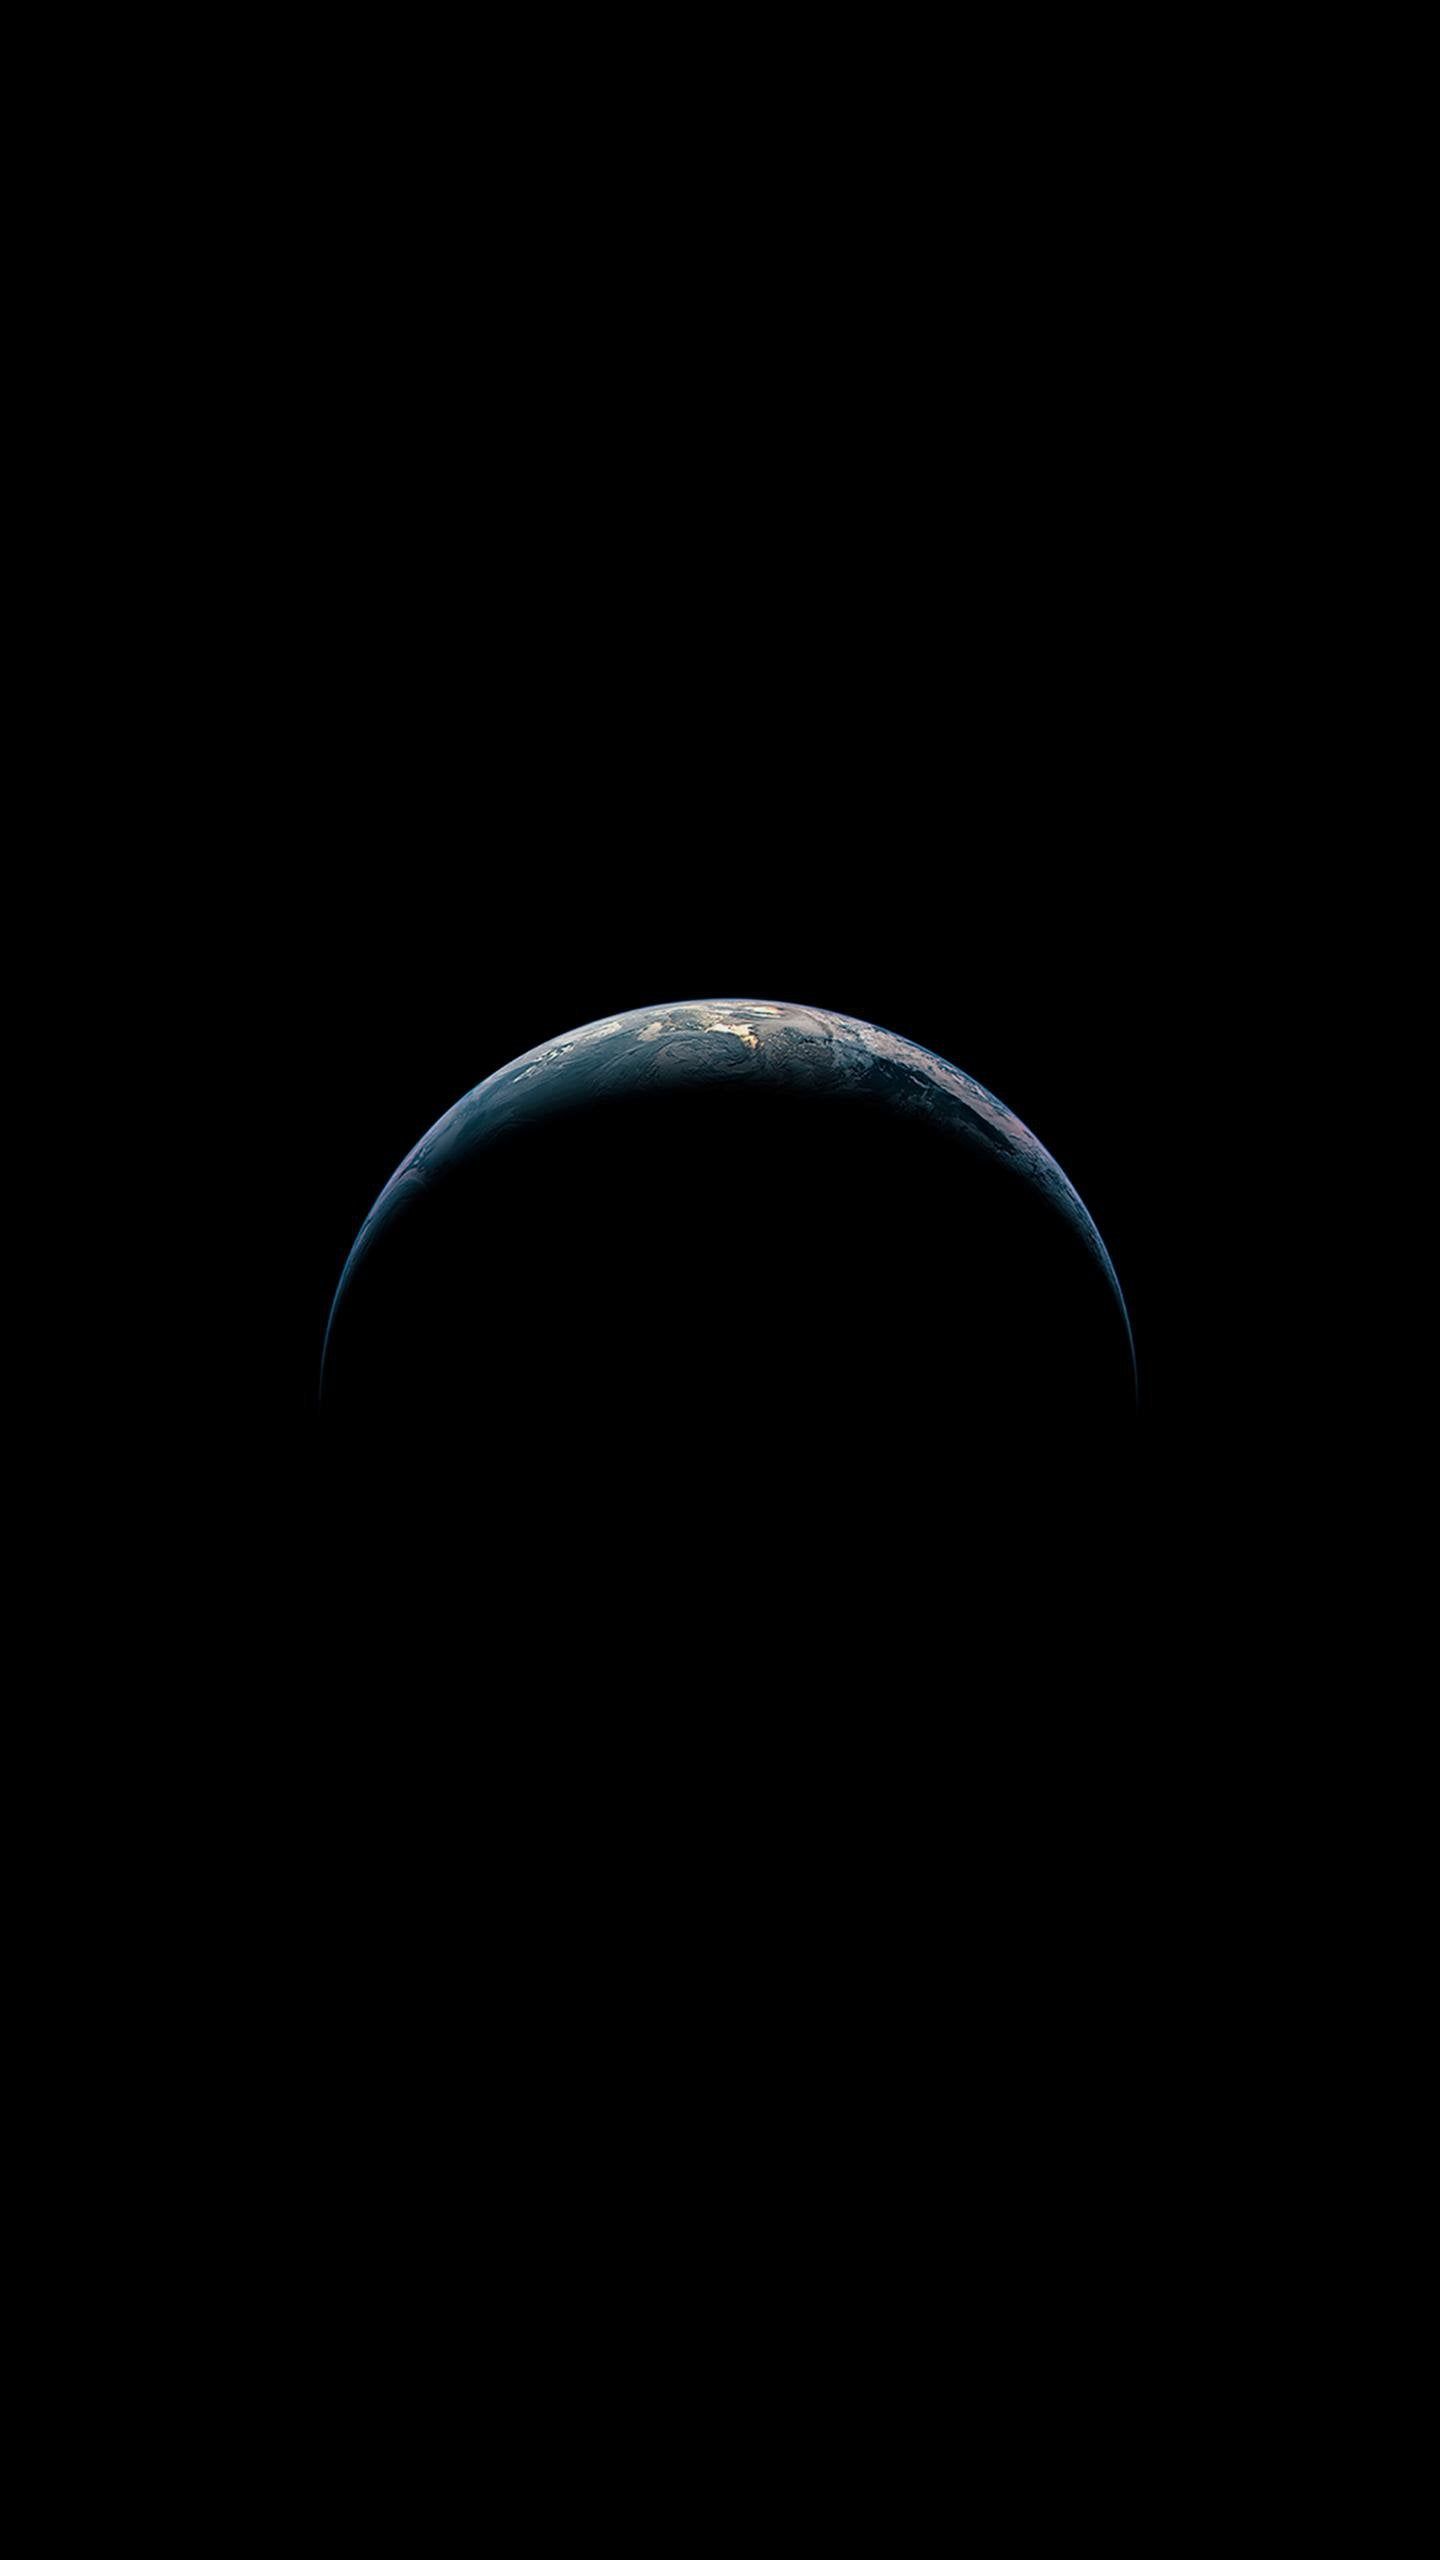 Exceptional minimalist black AMOLED wallpaper that can extend your battery life!